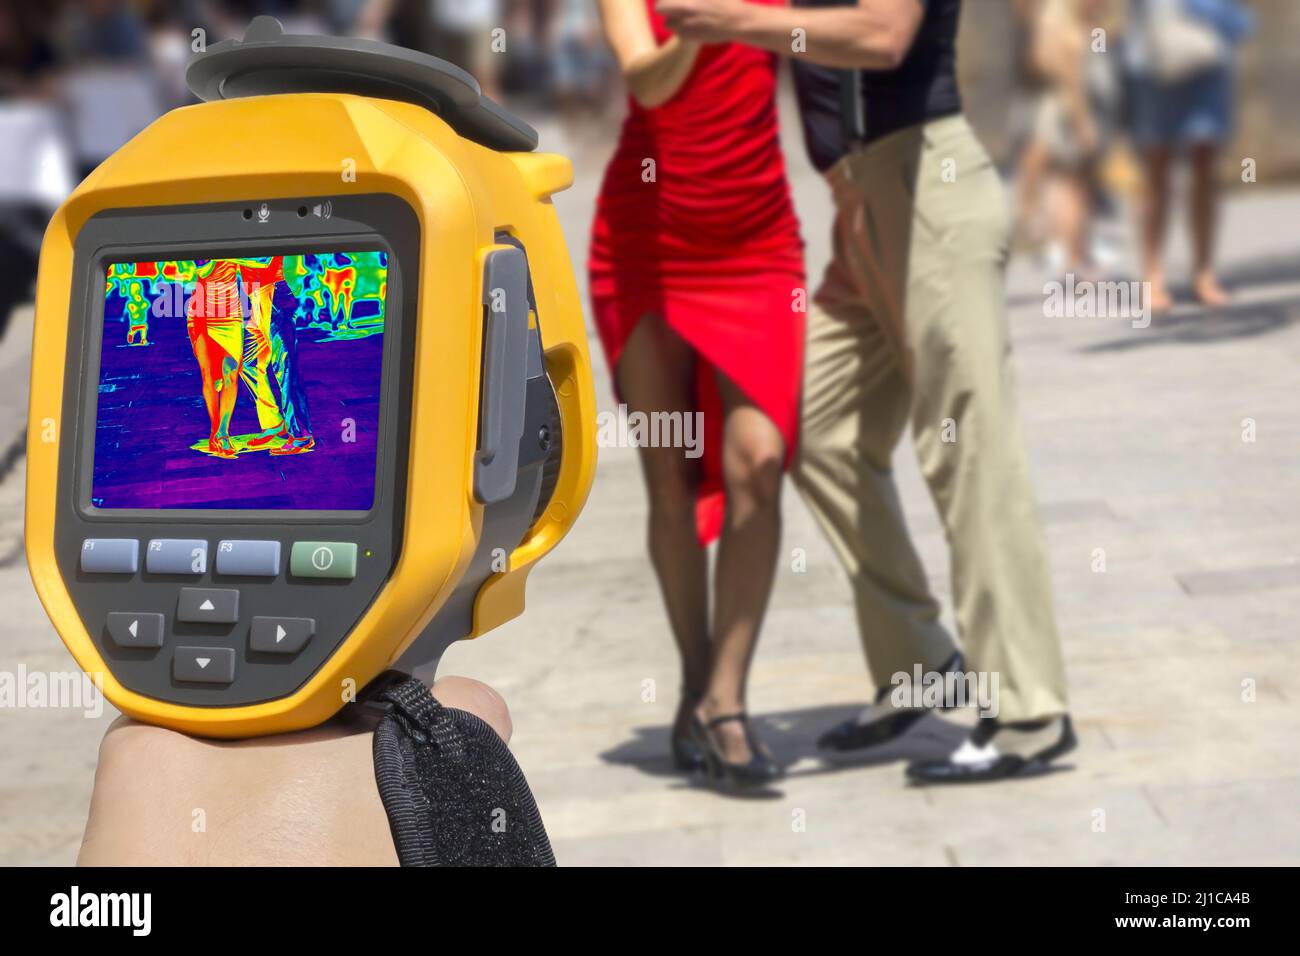 Recording Street dancers performing tango, With Infrared Thermal Camera Stock Photo